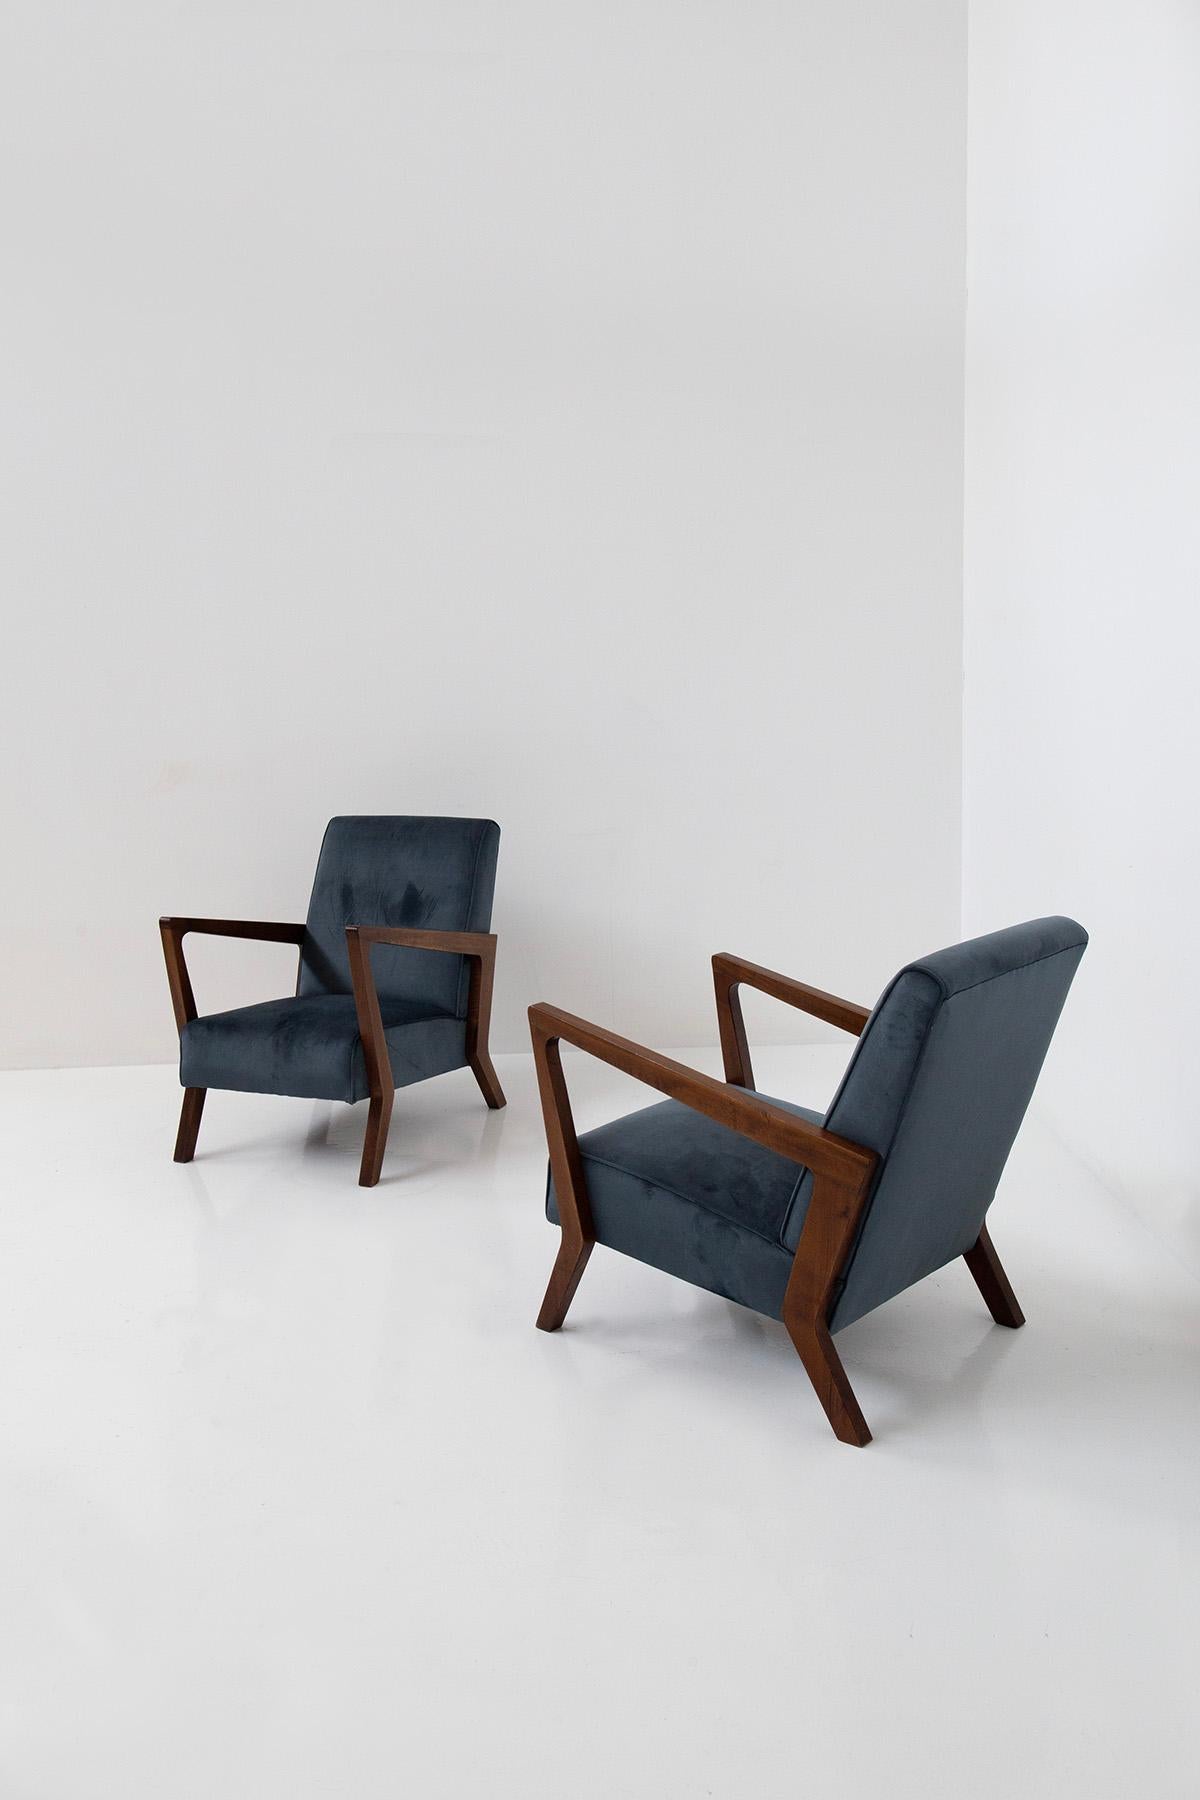 Presenting The pair of vintage Italian armchairs from the 1960s are an outstanding example of modern mid-century design, a period that had a significant impact on art, architecture, and, of course, interior design. Italian craftsmanship from that